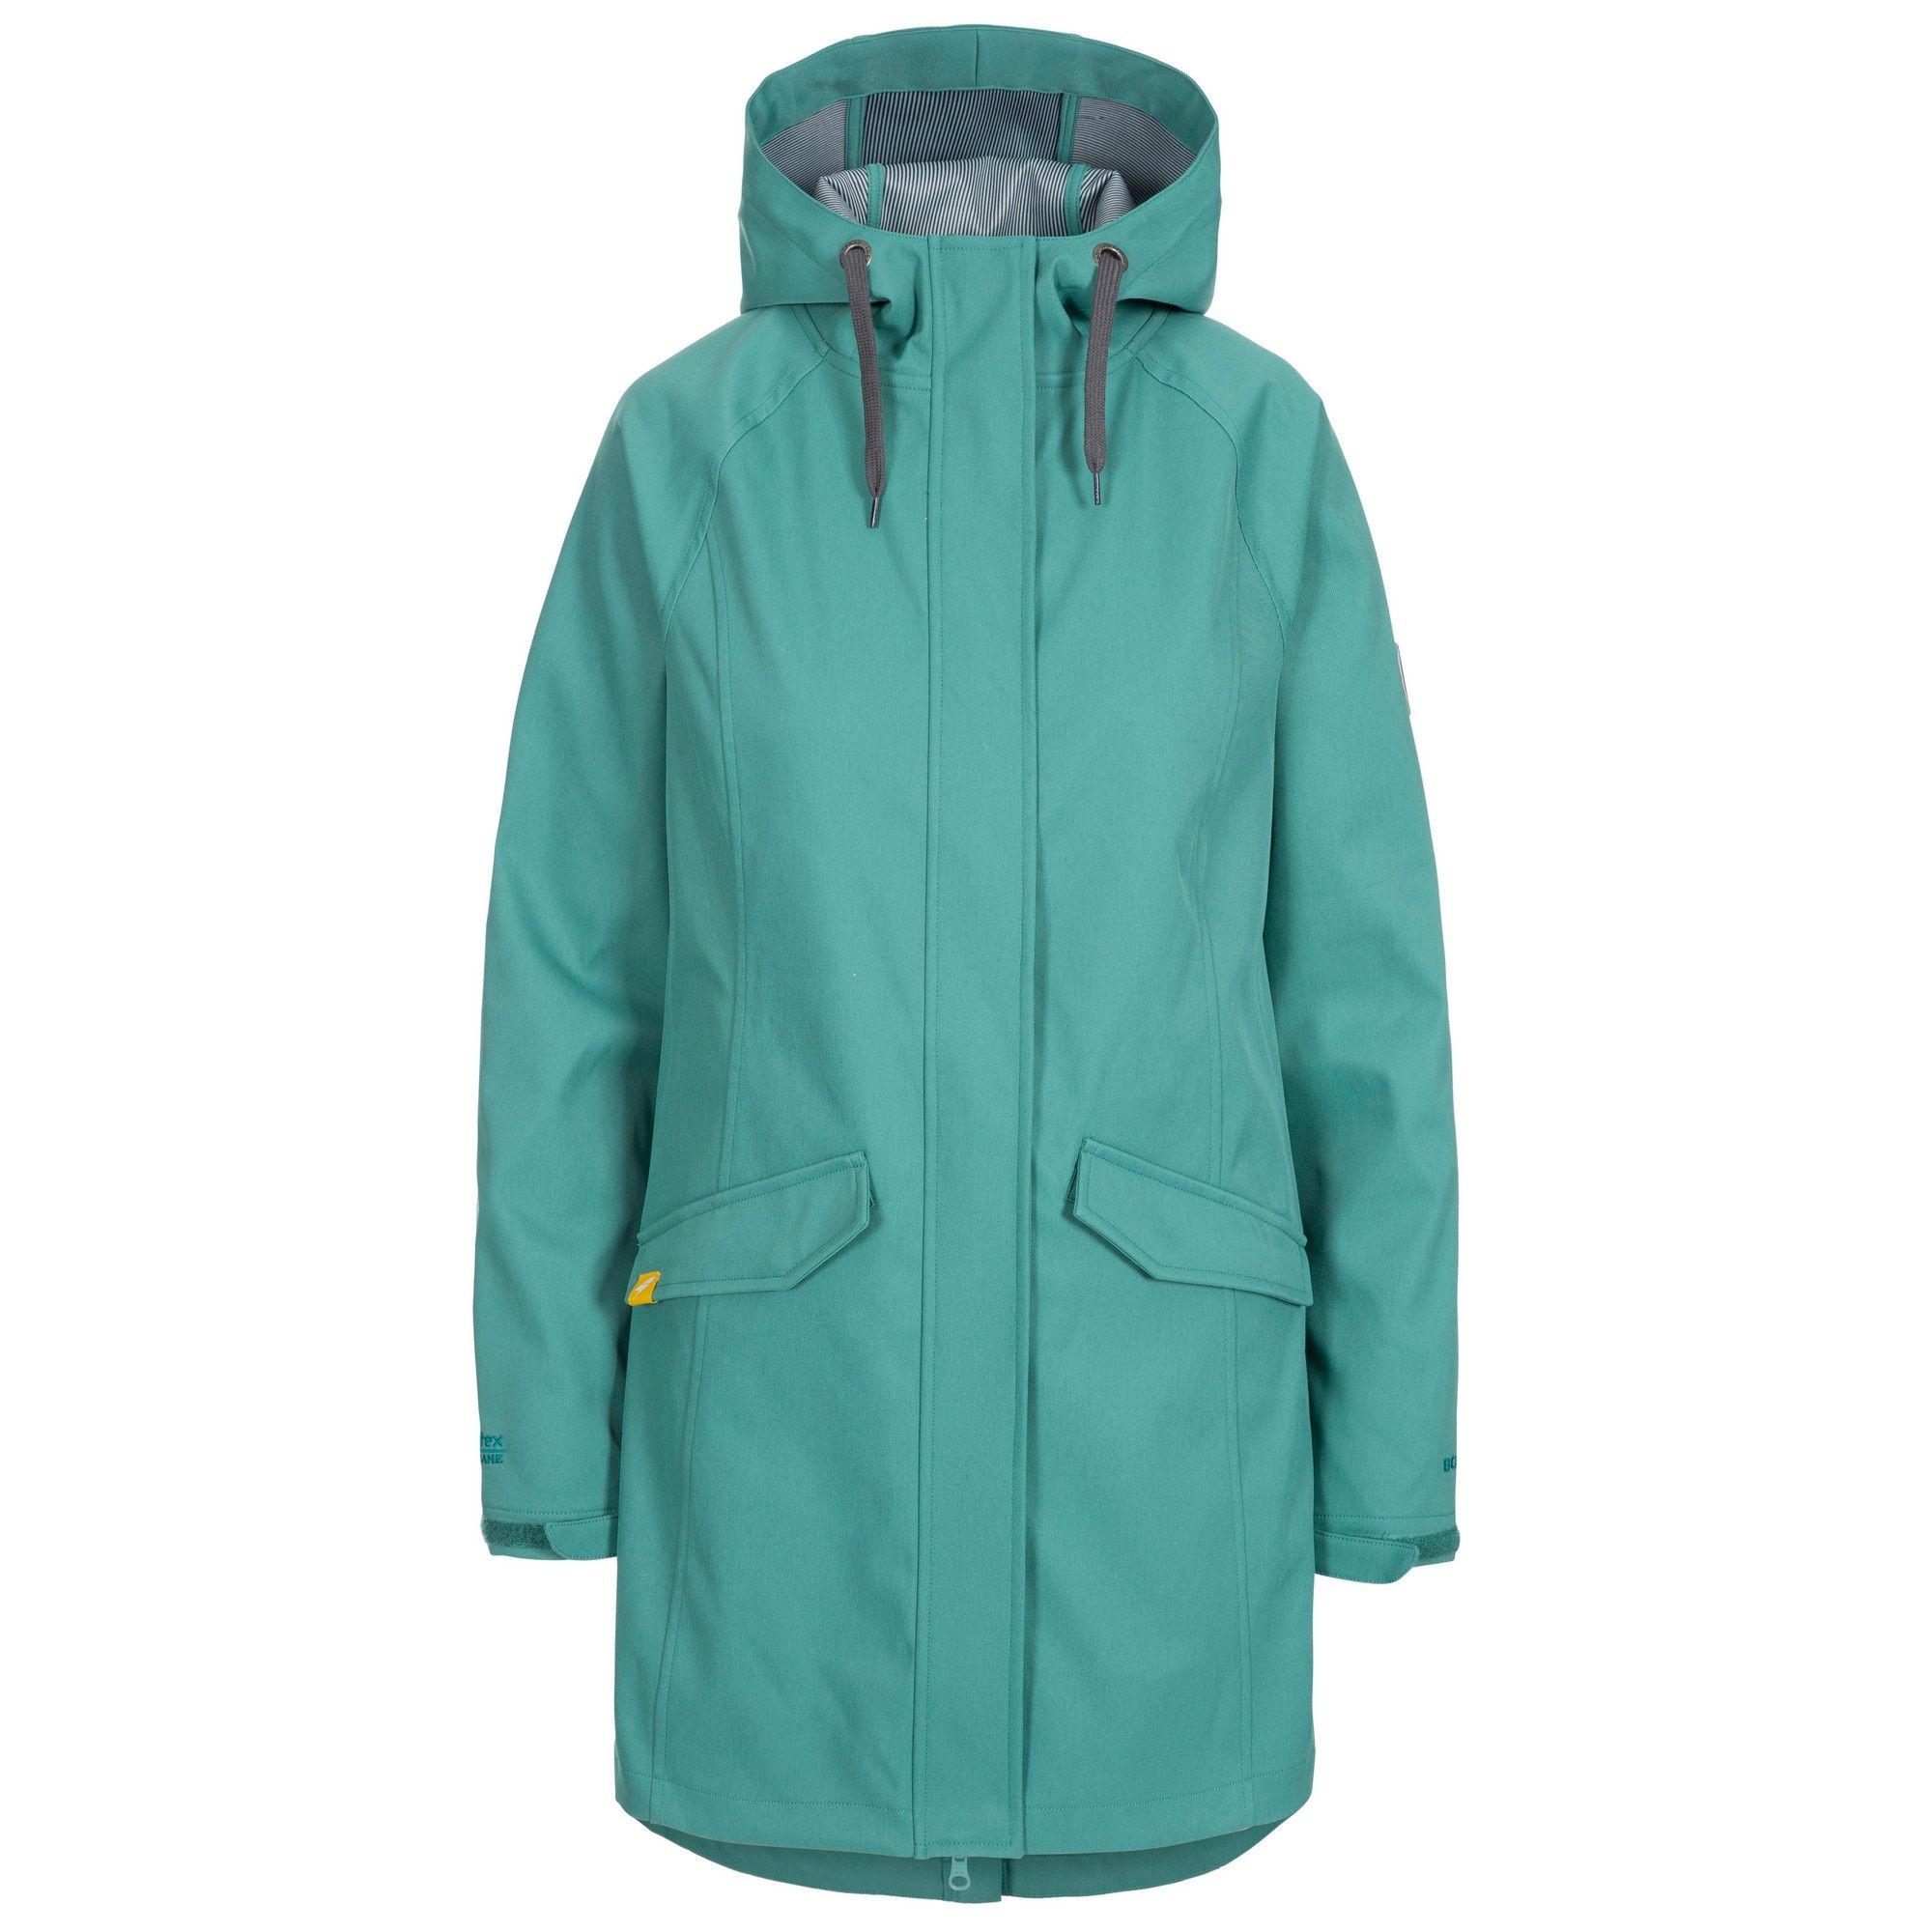 100% Polyester, TPU membrane. Longer length. Adjustable grown on hood. 2 lower pockets. 2 way centre front zip. Chin guard. Flat cuff with tab adjuster. Contrast bonded stripe back. Waterproof 8000mm, breathable 3000mvp, wind resistant. Trespass Womens Chest Sizing (approx): XS/8 - 32in/81cm, S/10 - 34in/86cm, M/12 - 36in/91.4cm, L/14 - 38in/96.5cm, XL/16 - 40in/101.5cm, XXL/18 - 42in/106.5cm.